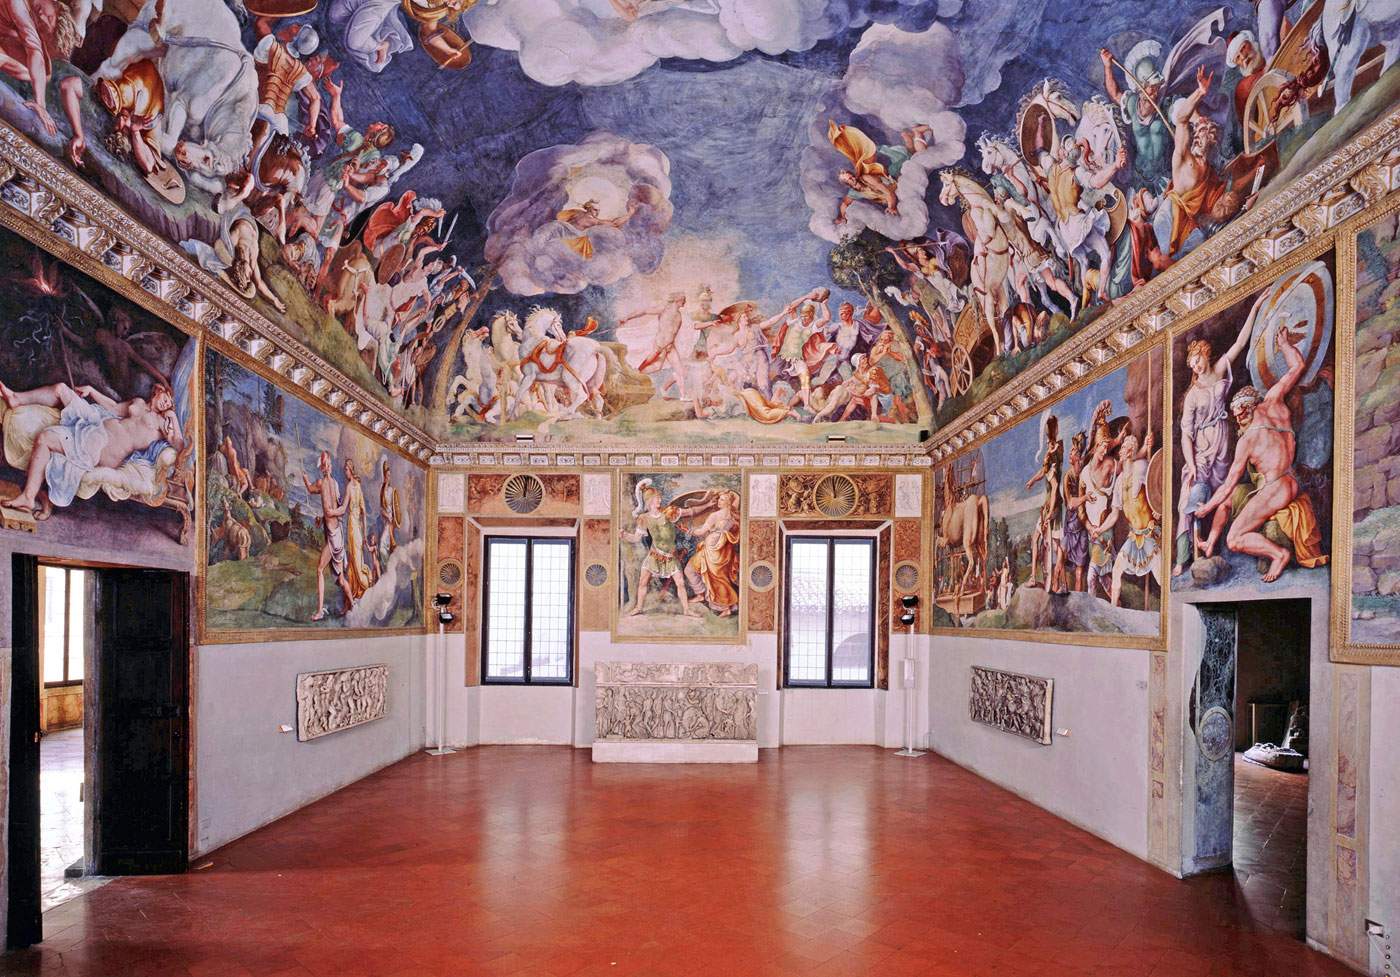 Giulio Romano's major exhibition in Mantua. Here's what we'll see this fall at the Ducal Palace